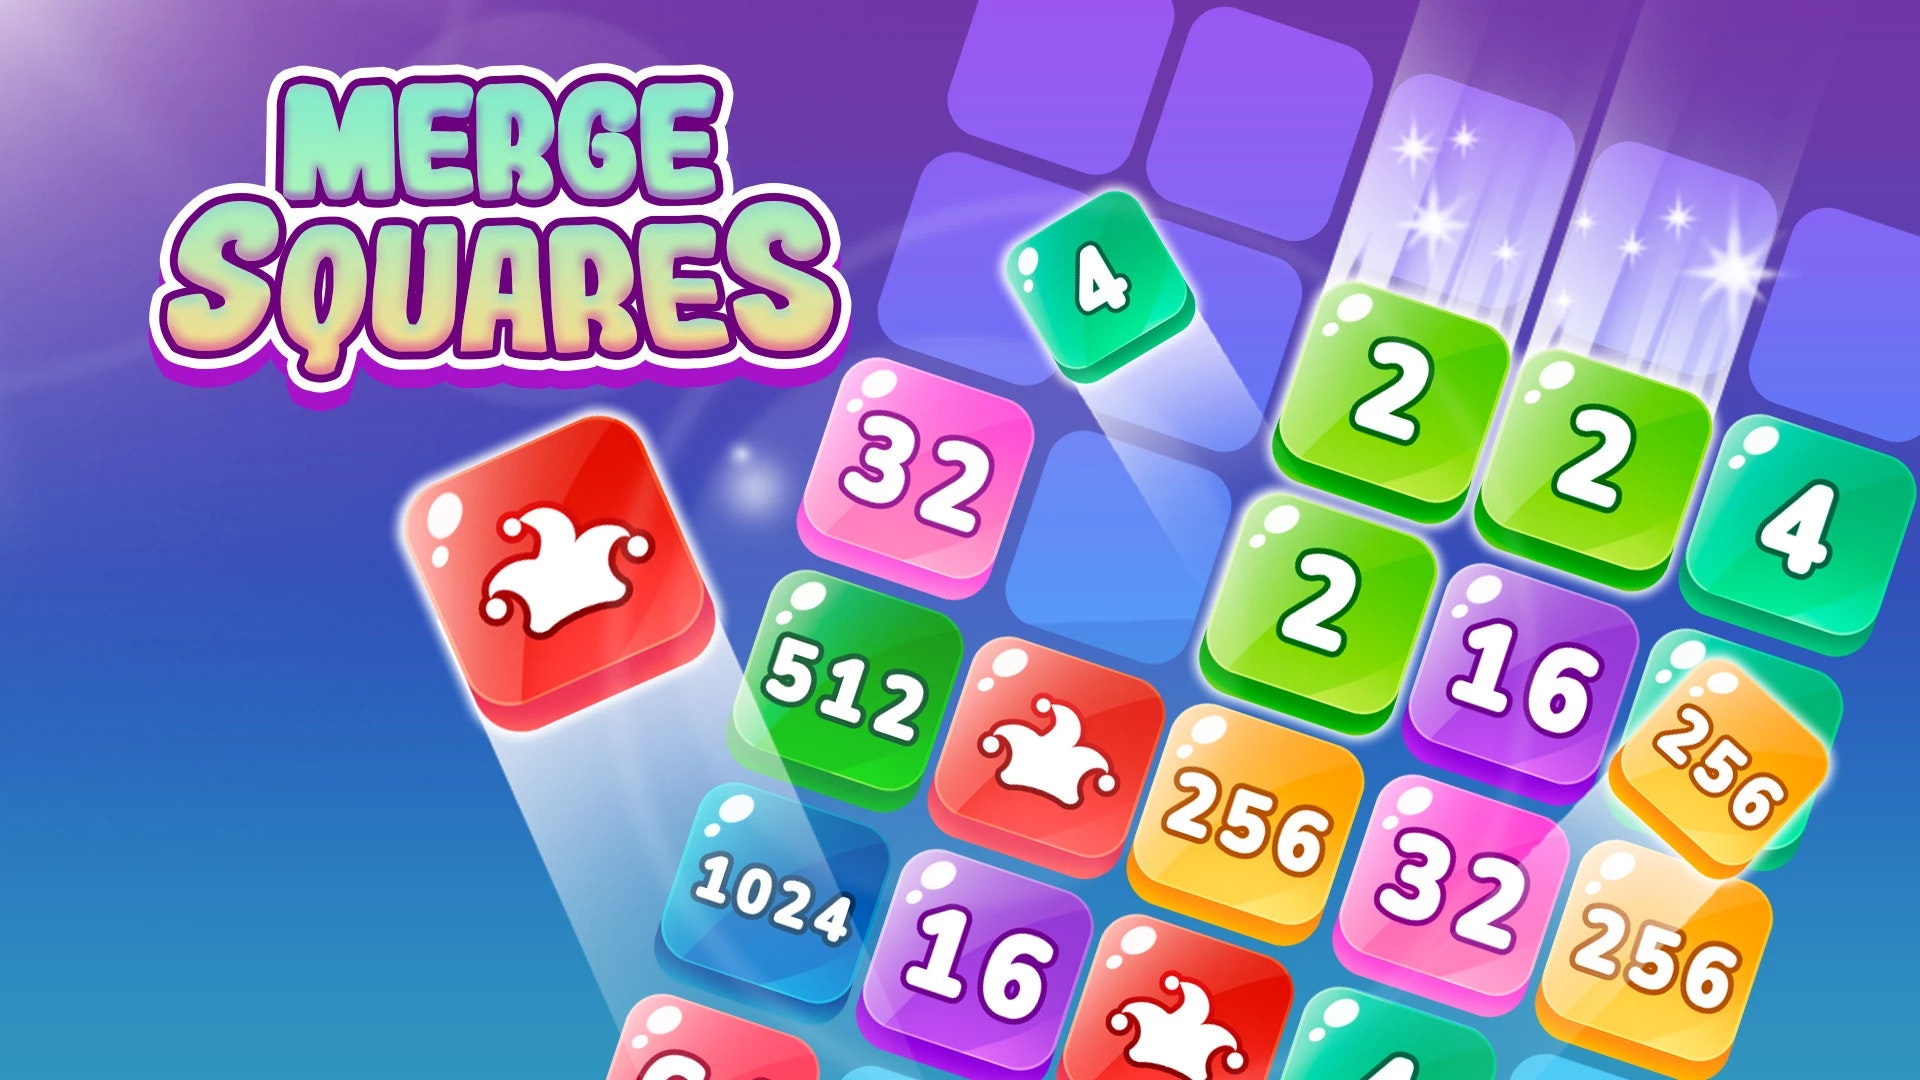 Inca Cubes 2048 🕹️ Play on CrazyGames